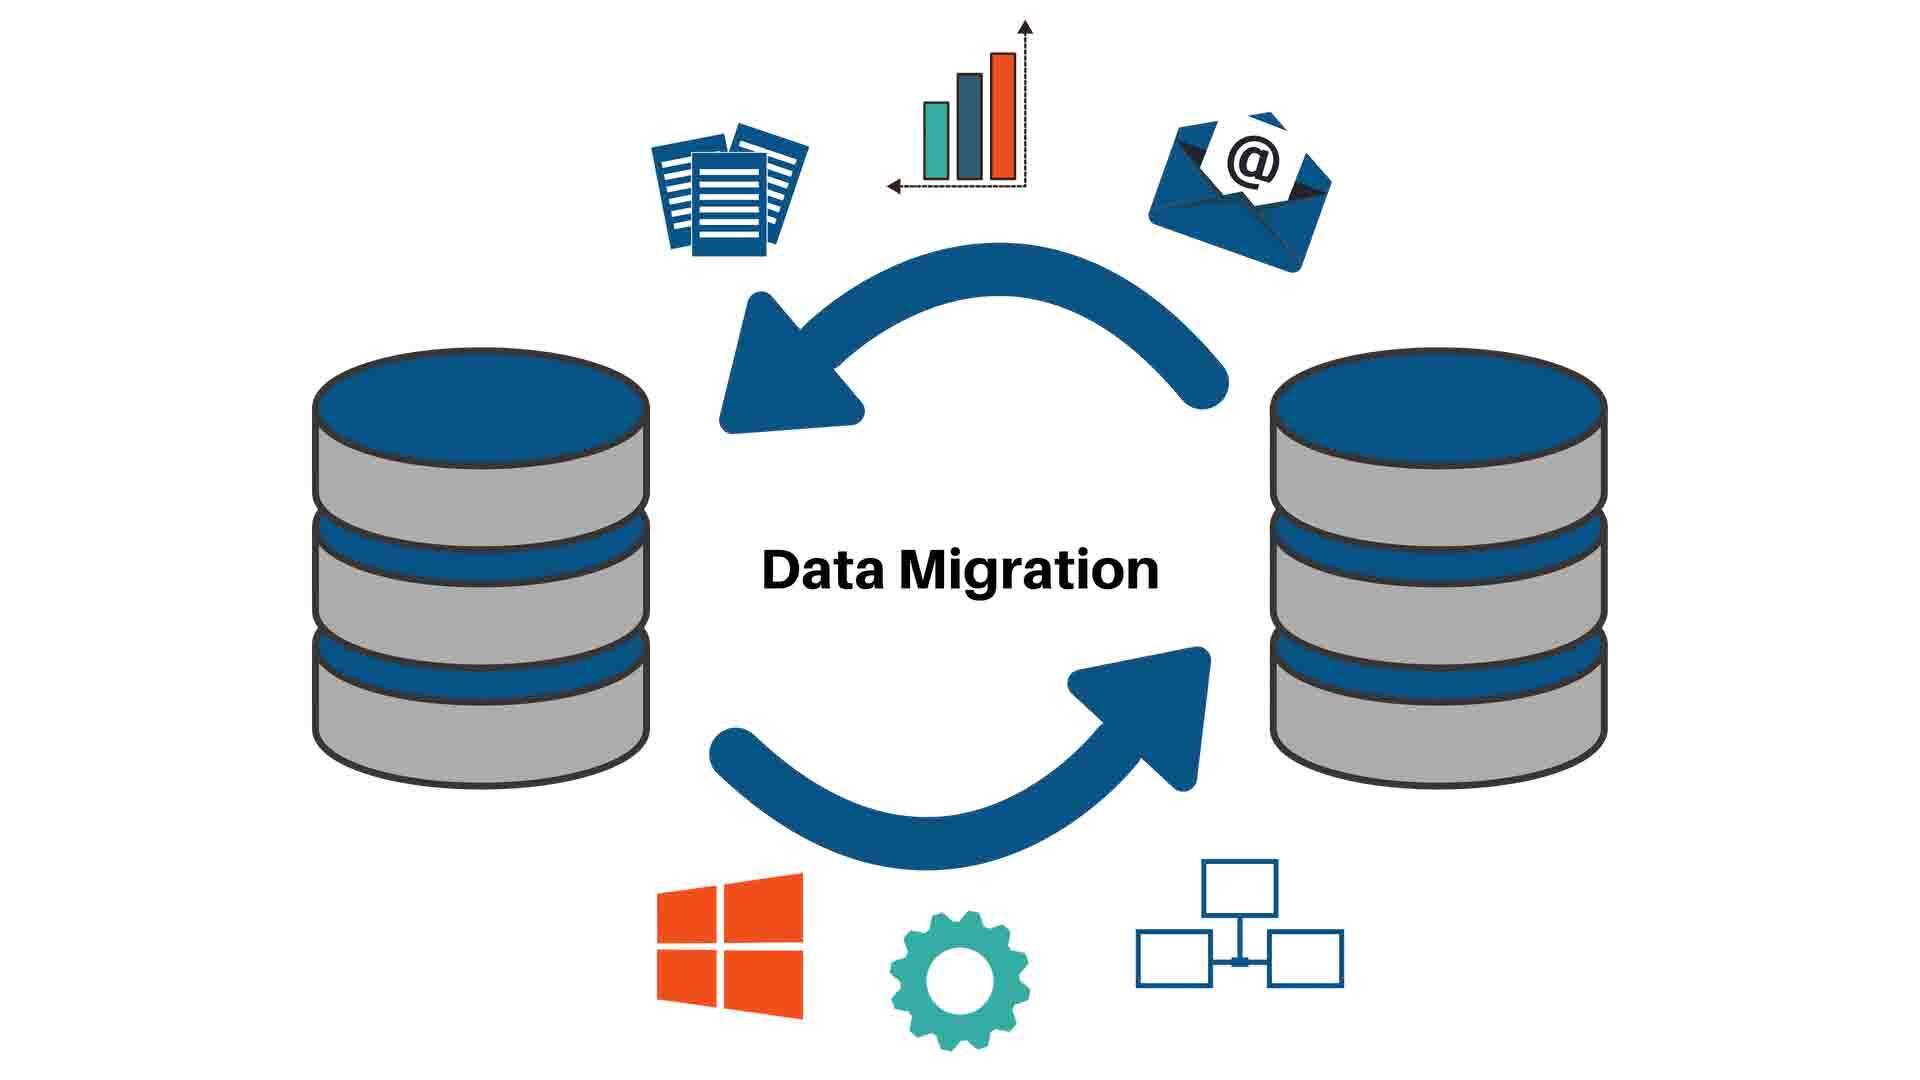 Image showing data migration process